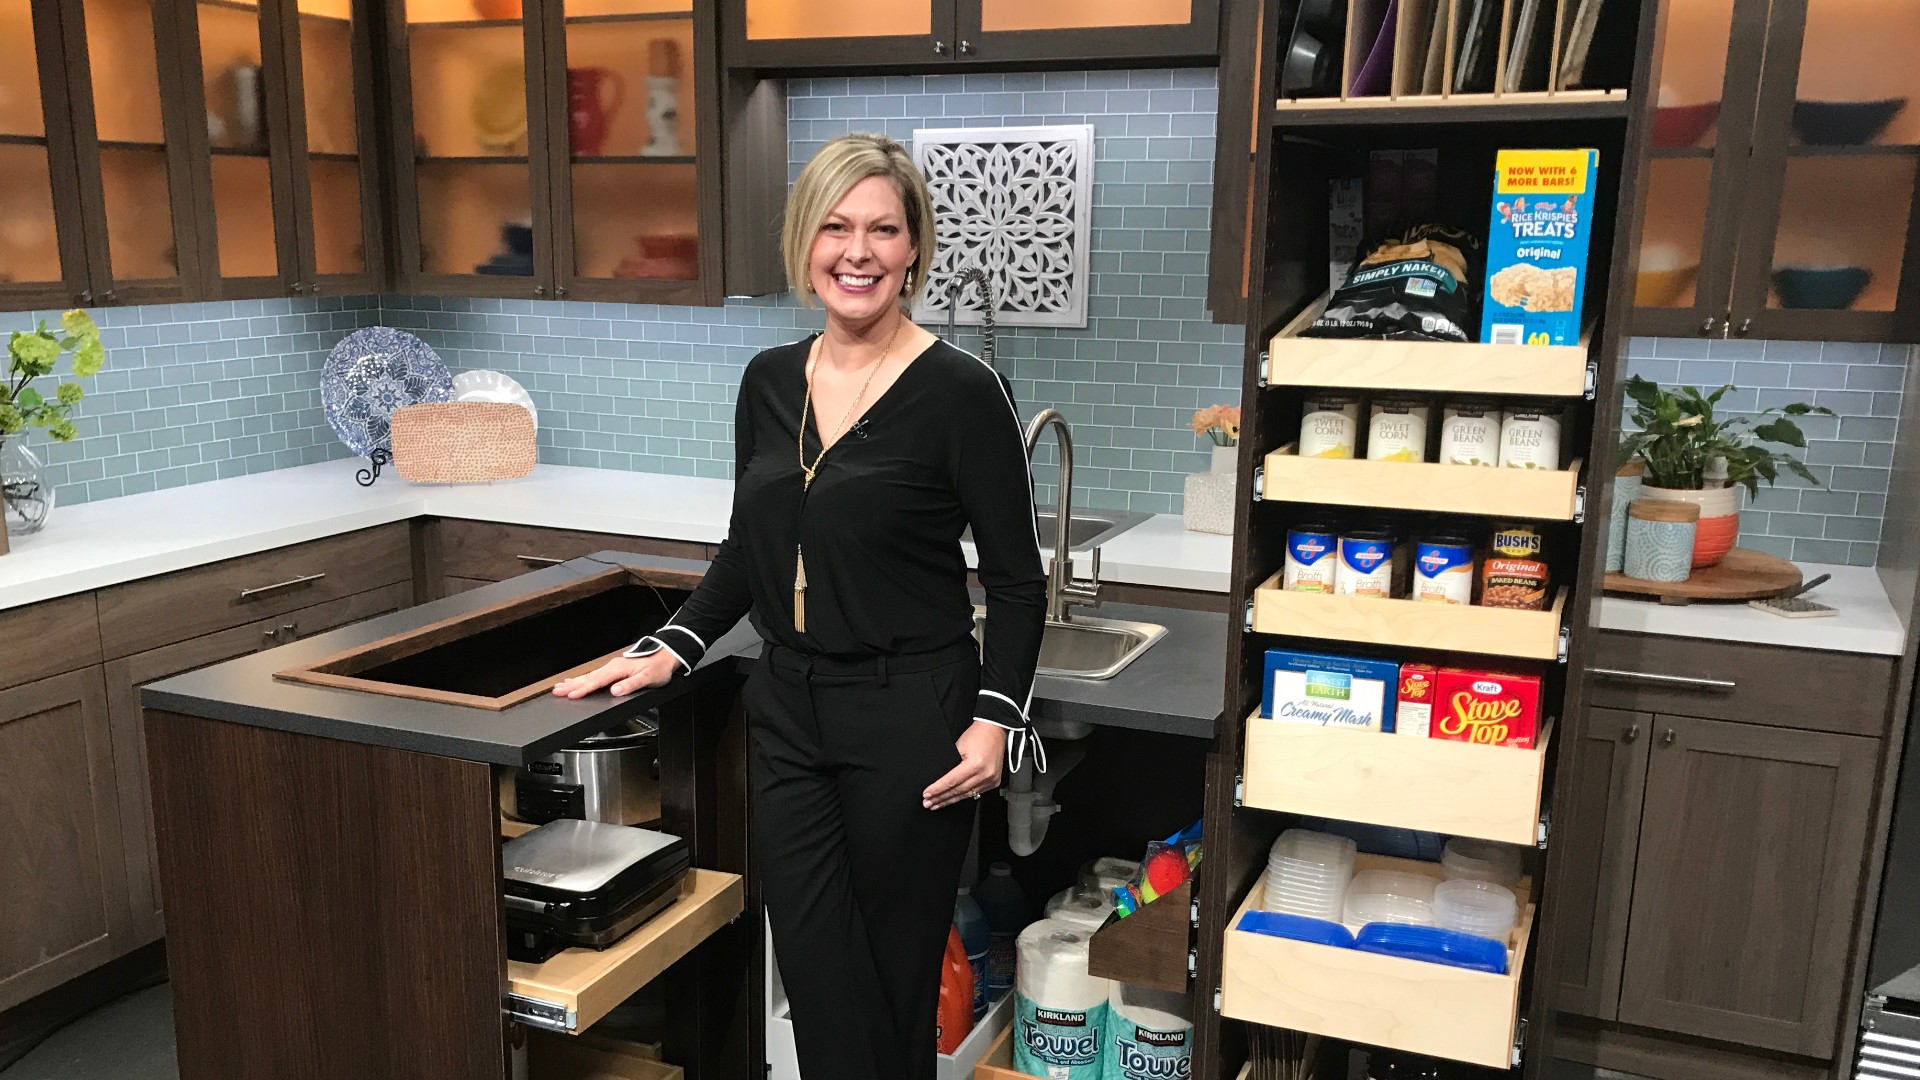 Leslie Kennison shares how to re-invent your kitchen with custom built Glide-Out shelving. Sponsored by ShelfGenie of Seattle.